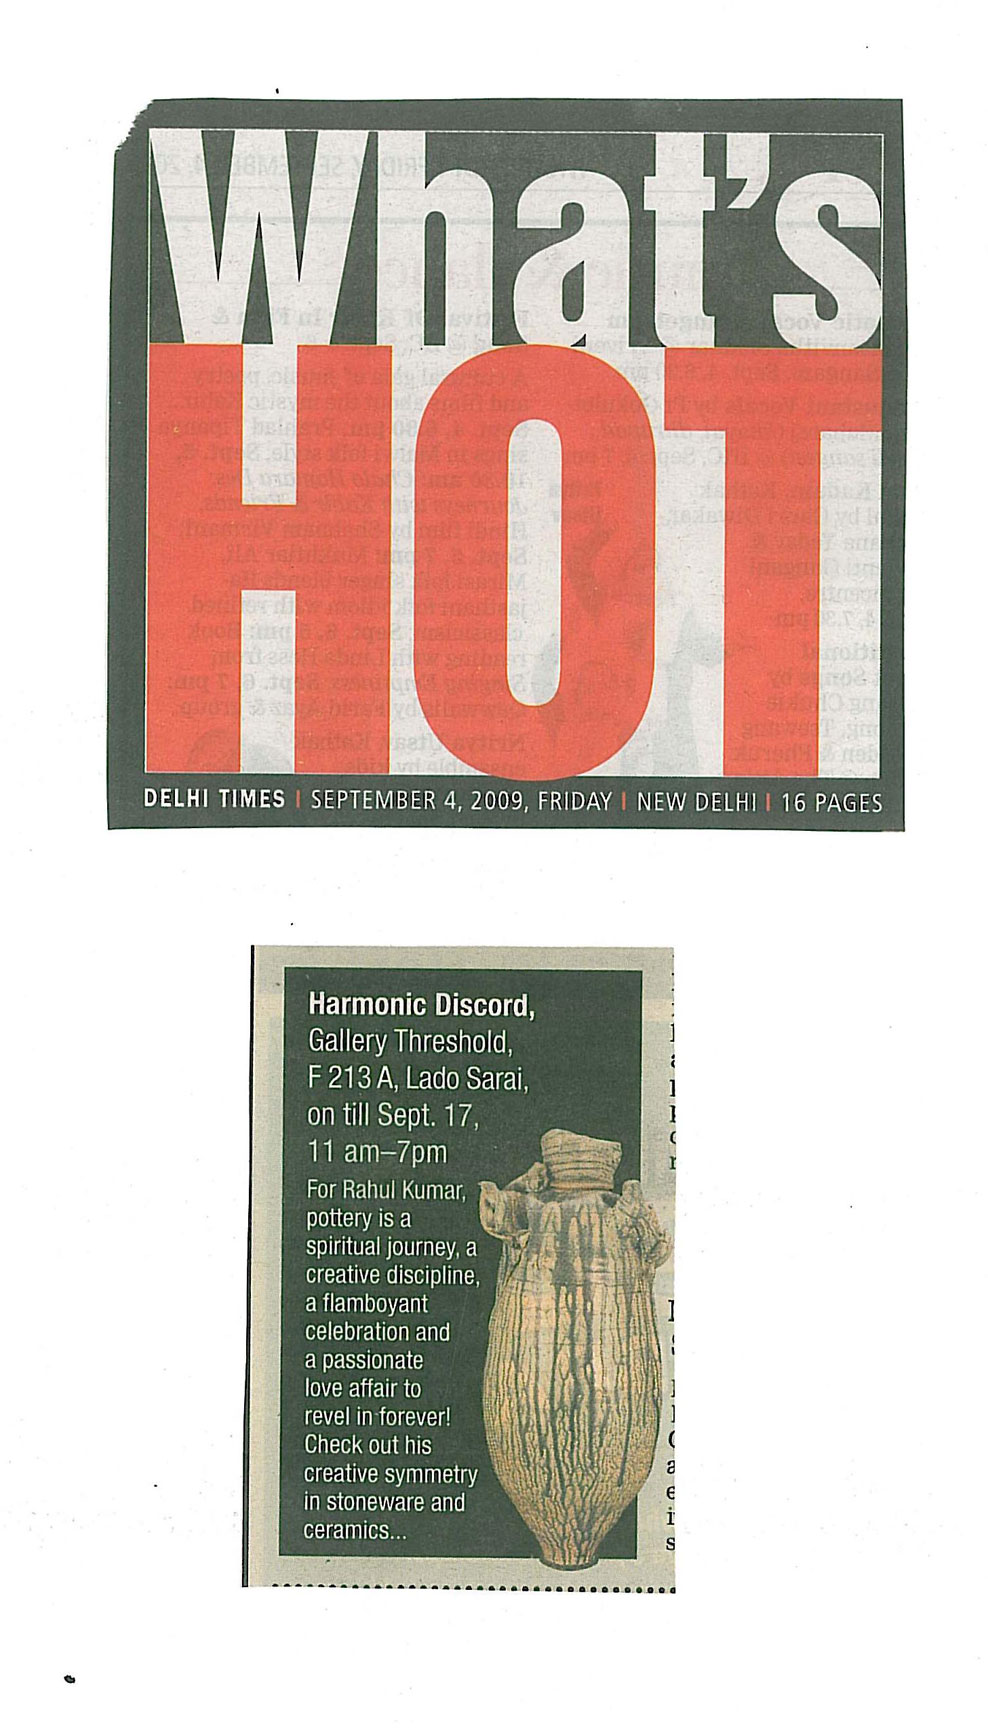 Preview of “harmonic discord II” - What's Hot, The Times of India, September 4, 2009